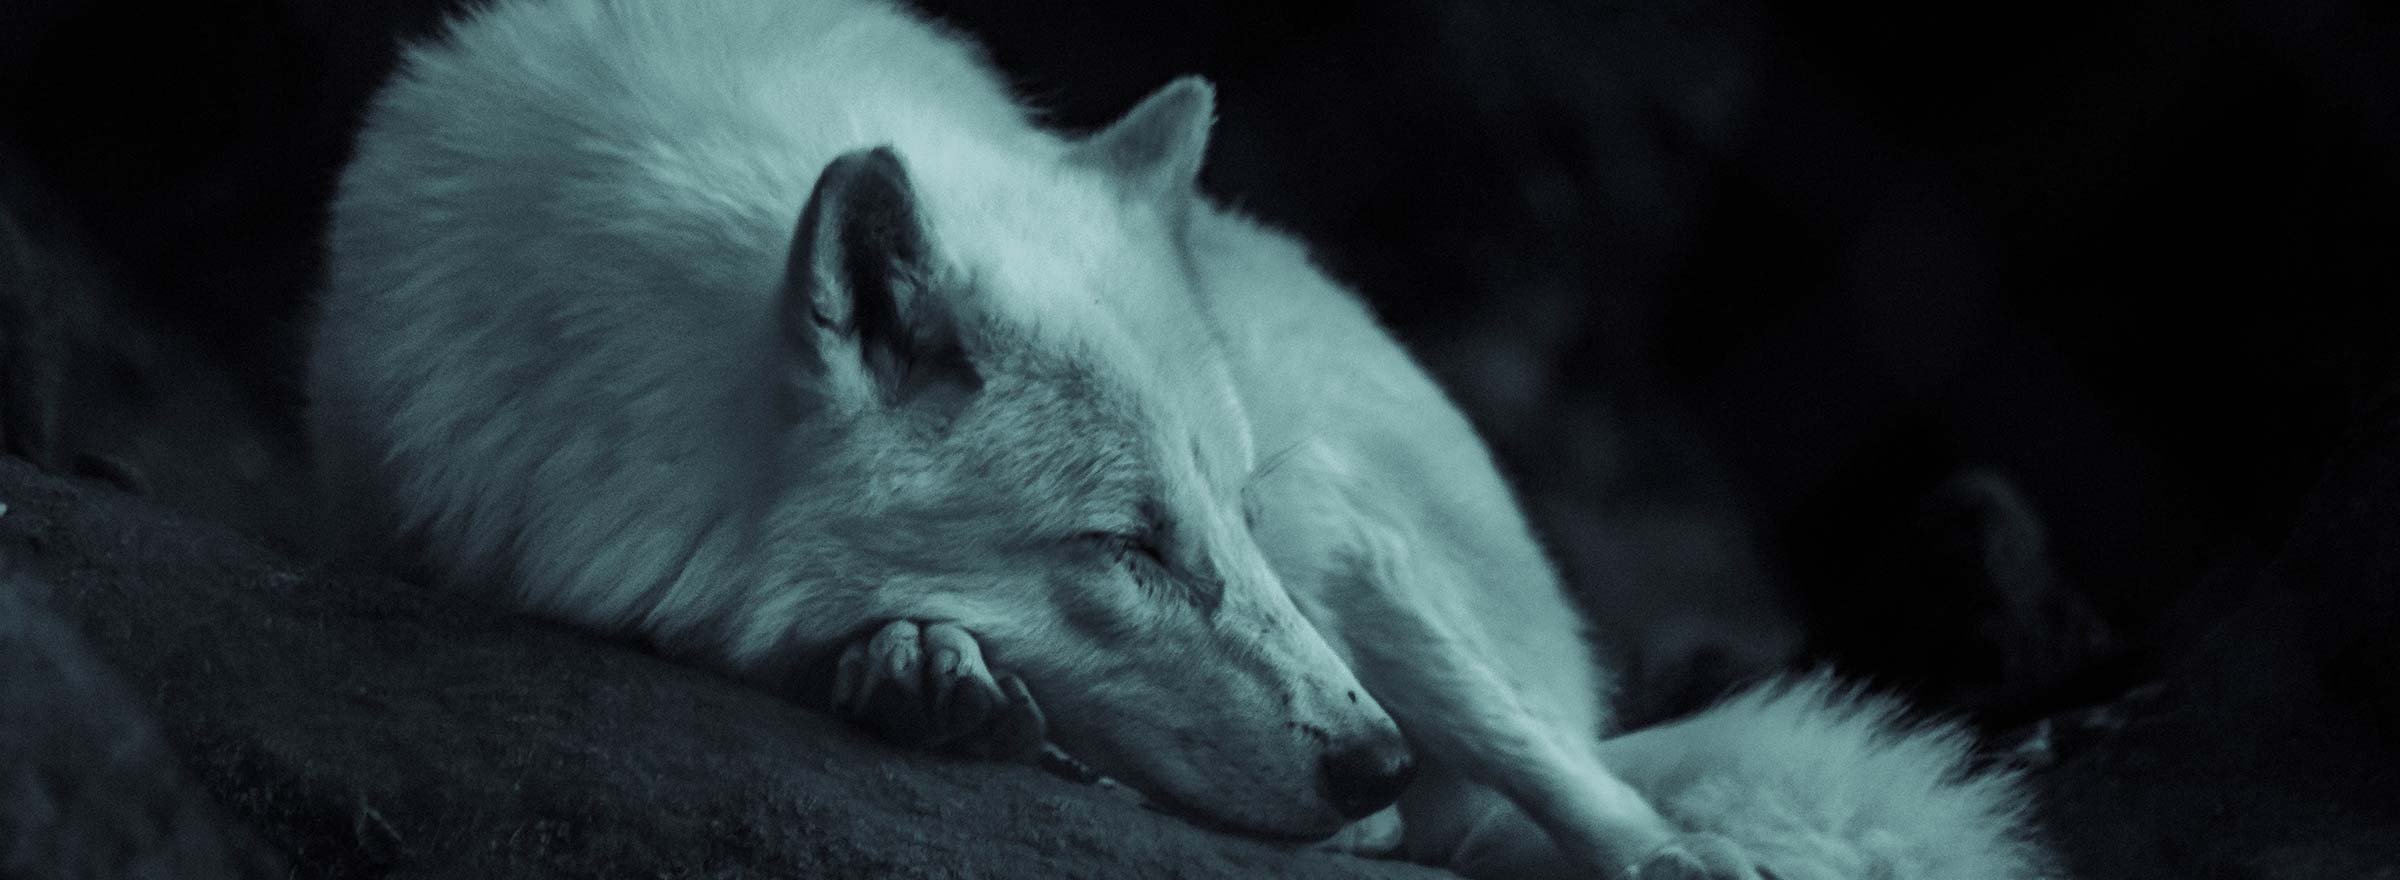 a wolf sleeping peacefully, representing The Wild Animal Sanctuary's nonprofit digital storytelling